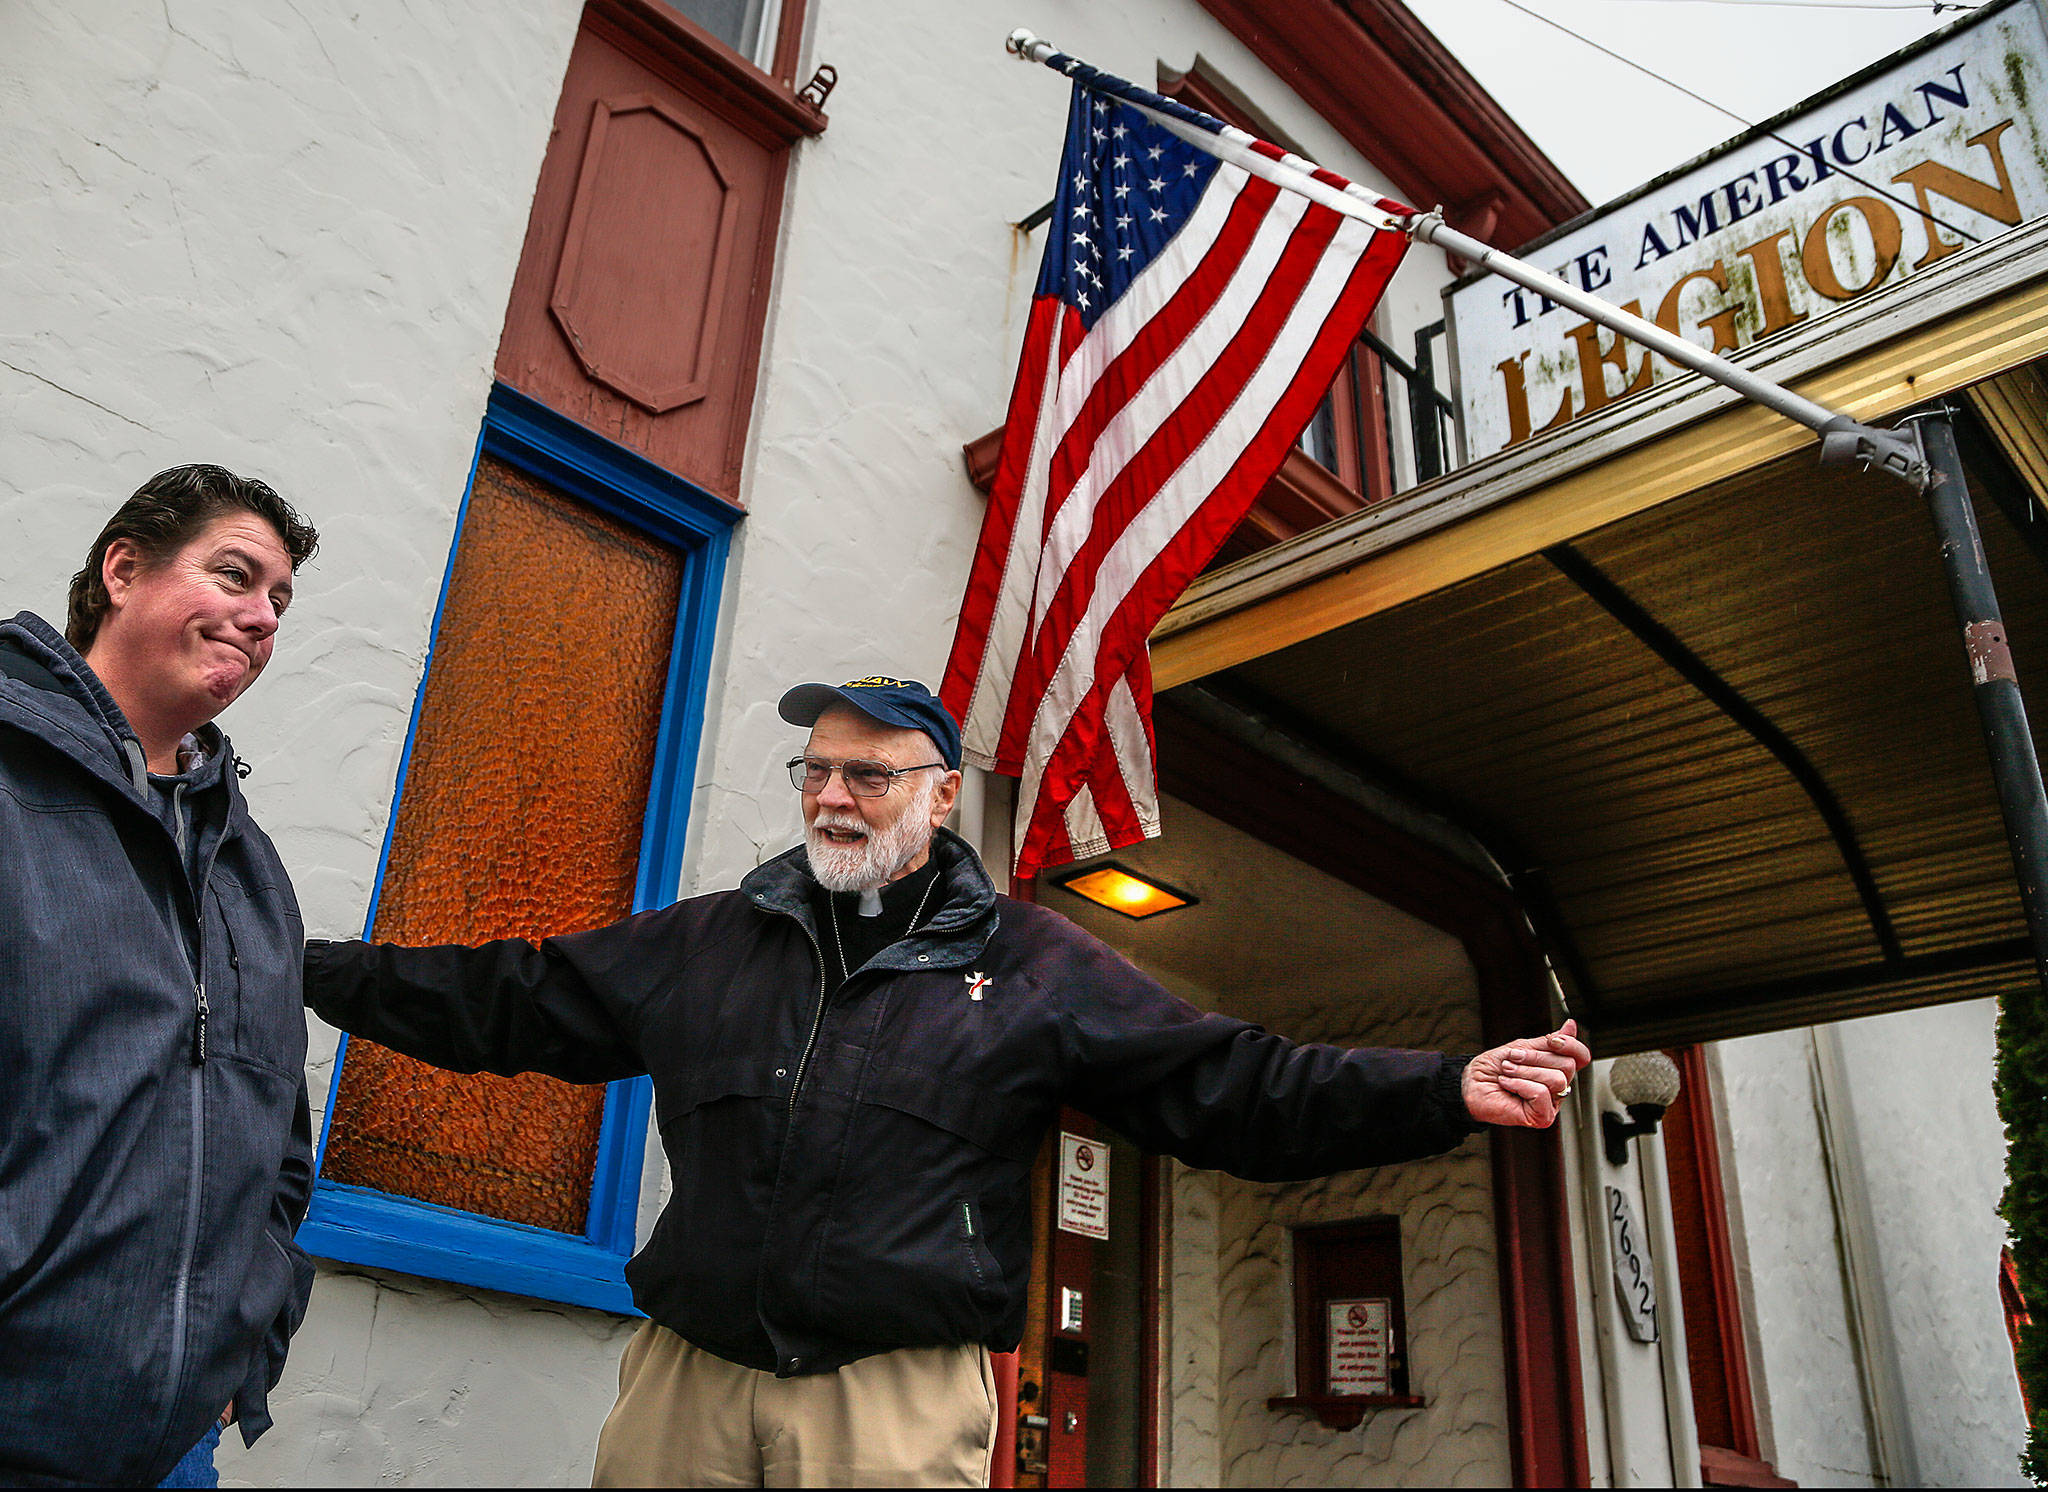 Just outside Stanwood’s American Legion Post 92 Thursday, Navy veteran and Post Chaplain Phil Lewis, 85, talks about major work needed on the building, which is only a few years younger than he is. Post Cmdr. Gina Seegert might appear to be suffering from a little sticker shock, considering they need to raise $90,000. (Dan Bates / The Herald)